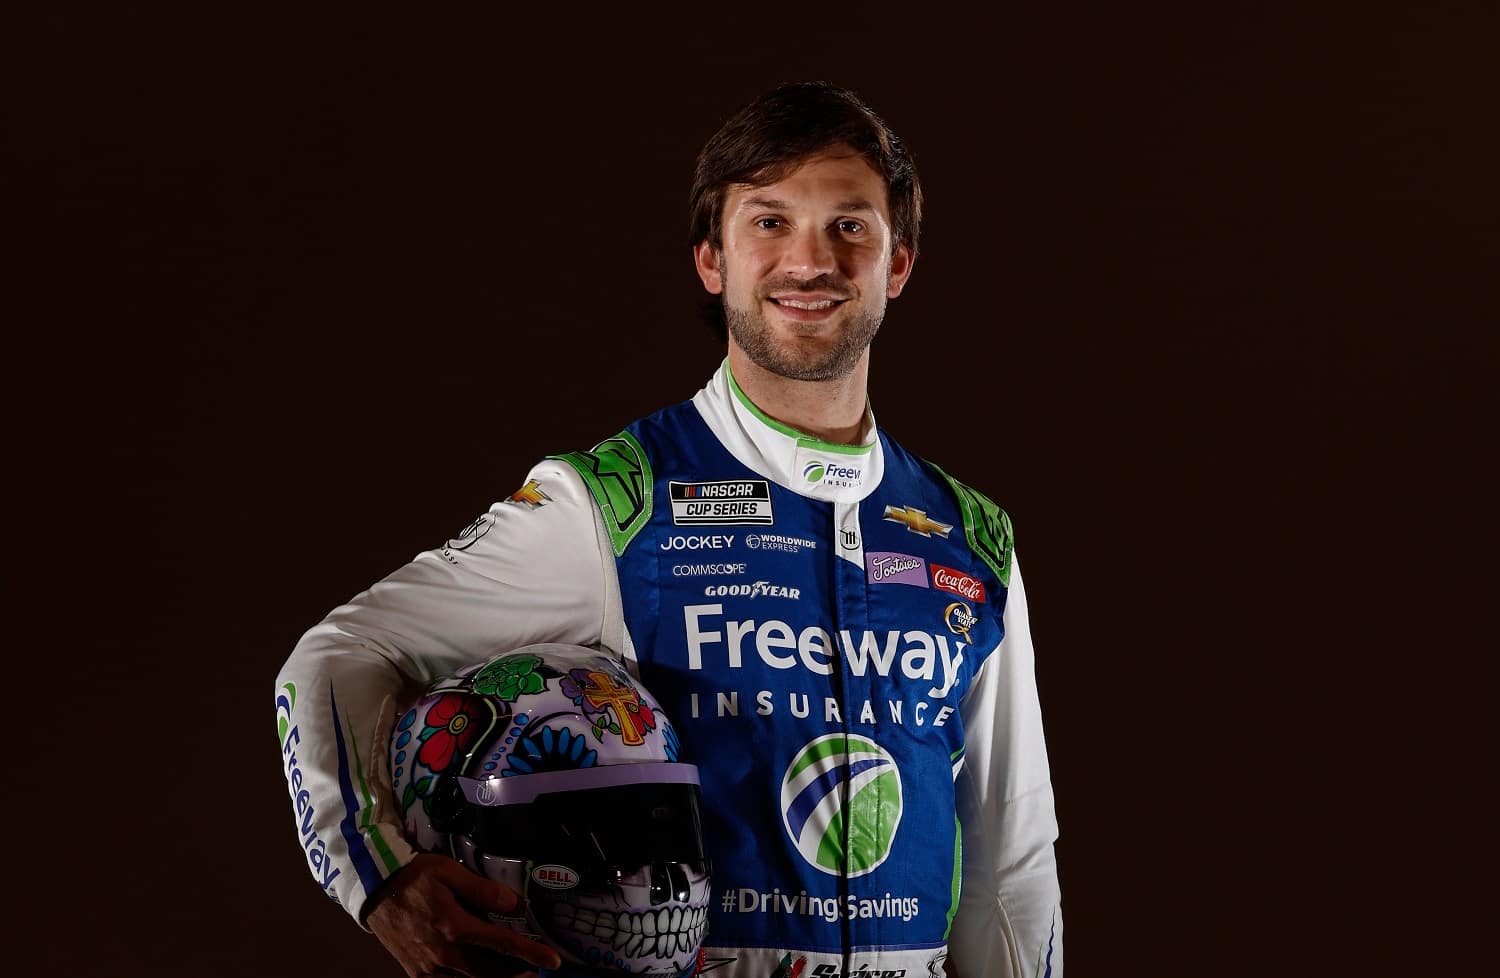 NASCAR driver Daniel Suarez poses for a photo during NASCAR Production Days at Charlotte Convention Center on Jan. 18, 2023 in Charlotte, North Carolina.